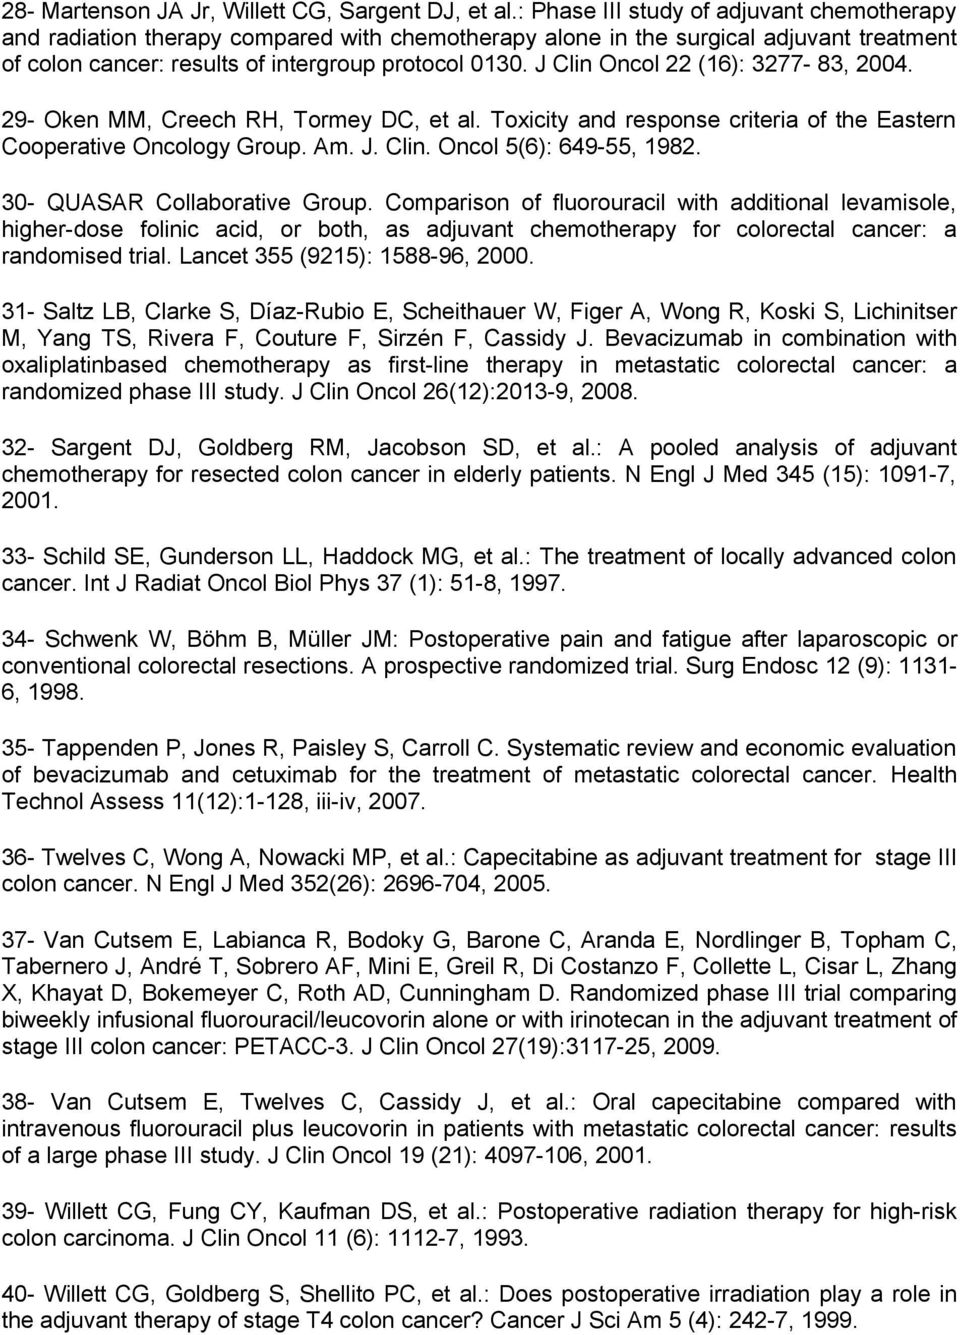 J Clin Oncol 22 (16): 3277-83, 2004. 29- Oken MM, Creech RH, Tormey DC, et al. Toxicity and response criteria of the Eastern Cooperative Oncology Group. Am. J. Clin. Oncol 5(6): 649-55, 1982.